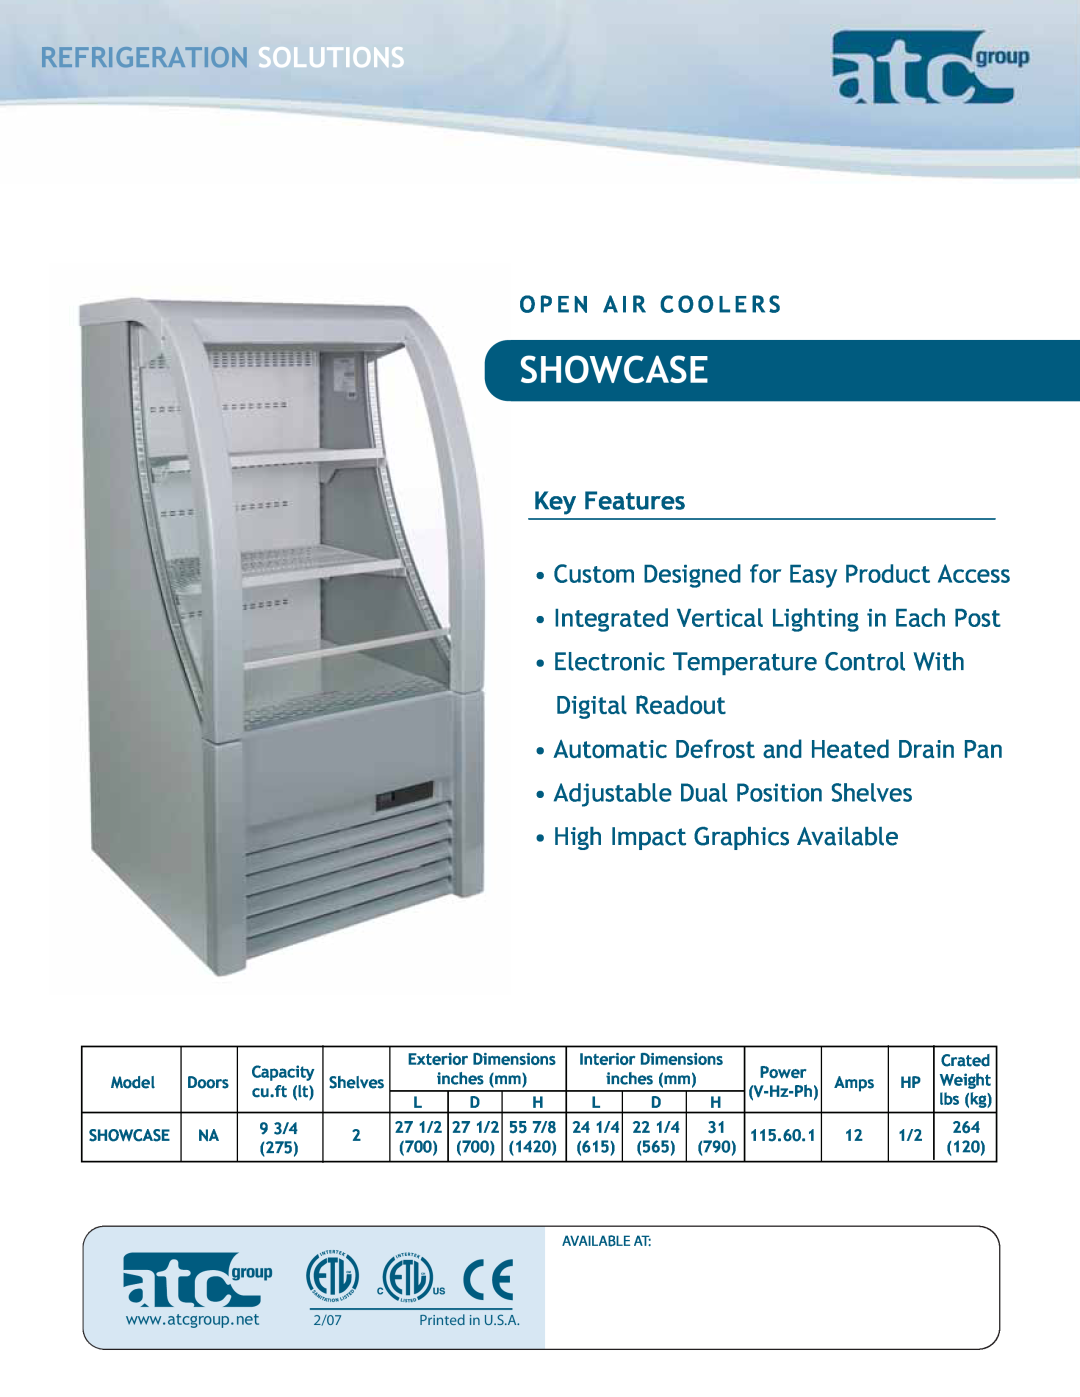 ATC Group SHOWCASE dimensions Refrigeration Solutions, Showcase, Key Features 